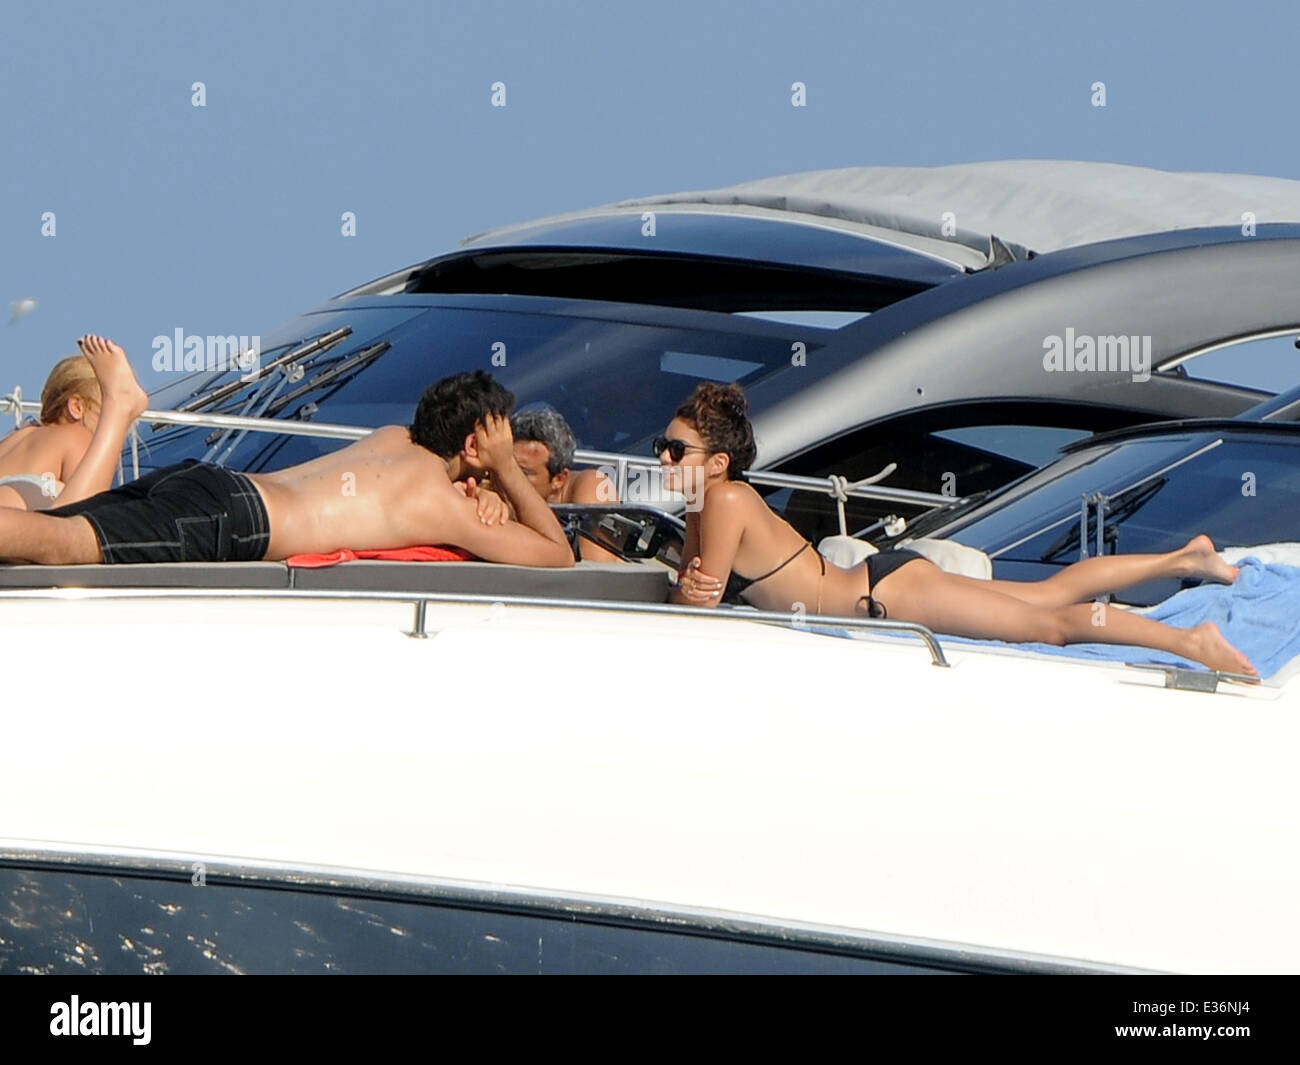 Vanessa Hudgens spends time on a boat with friends, including film directors Eli Roth and Terry Gilliam.  Featuring: Vanessa Hudgens,Eli Roth Where: Ischia, Italy When: 19 Jul 2013 Stock Photo